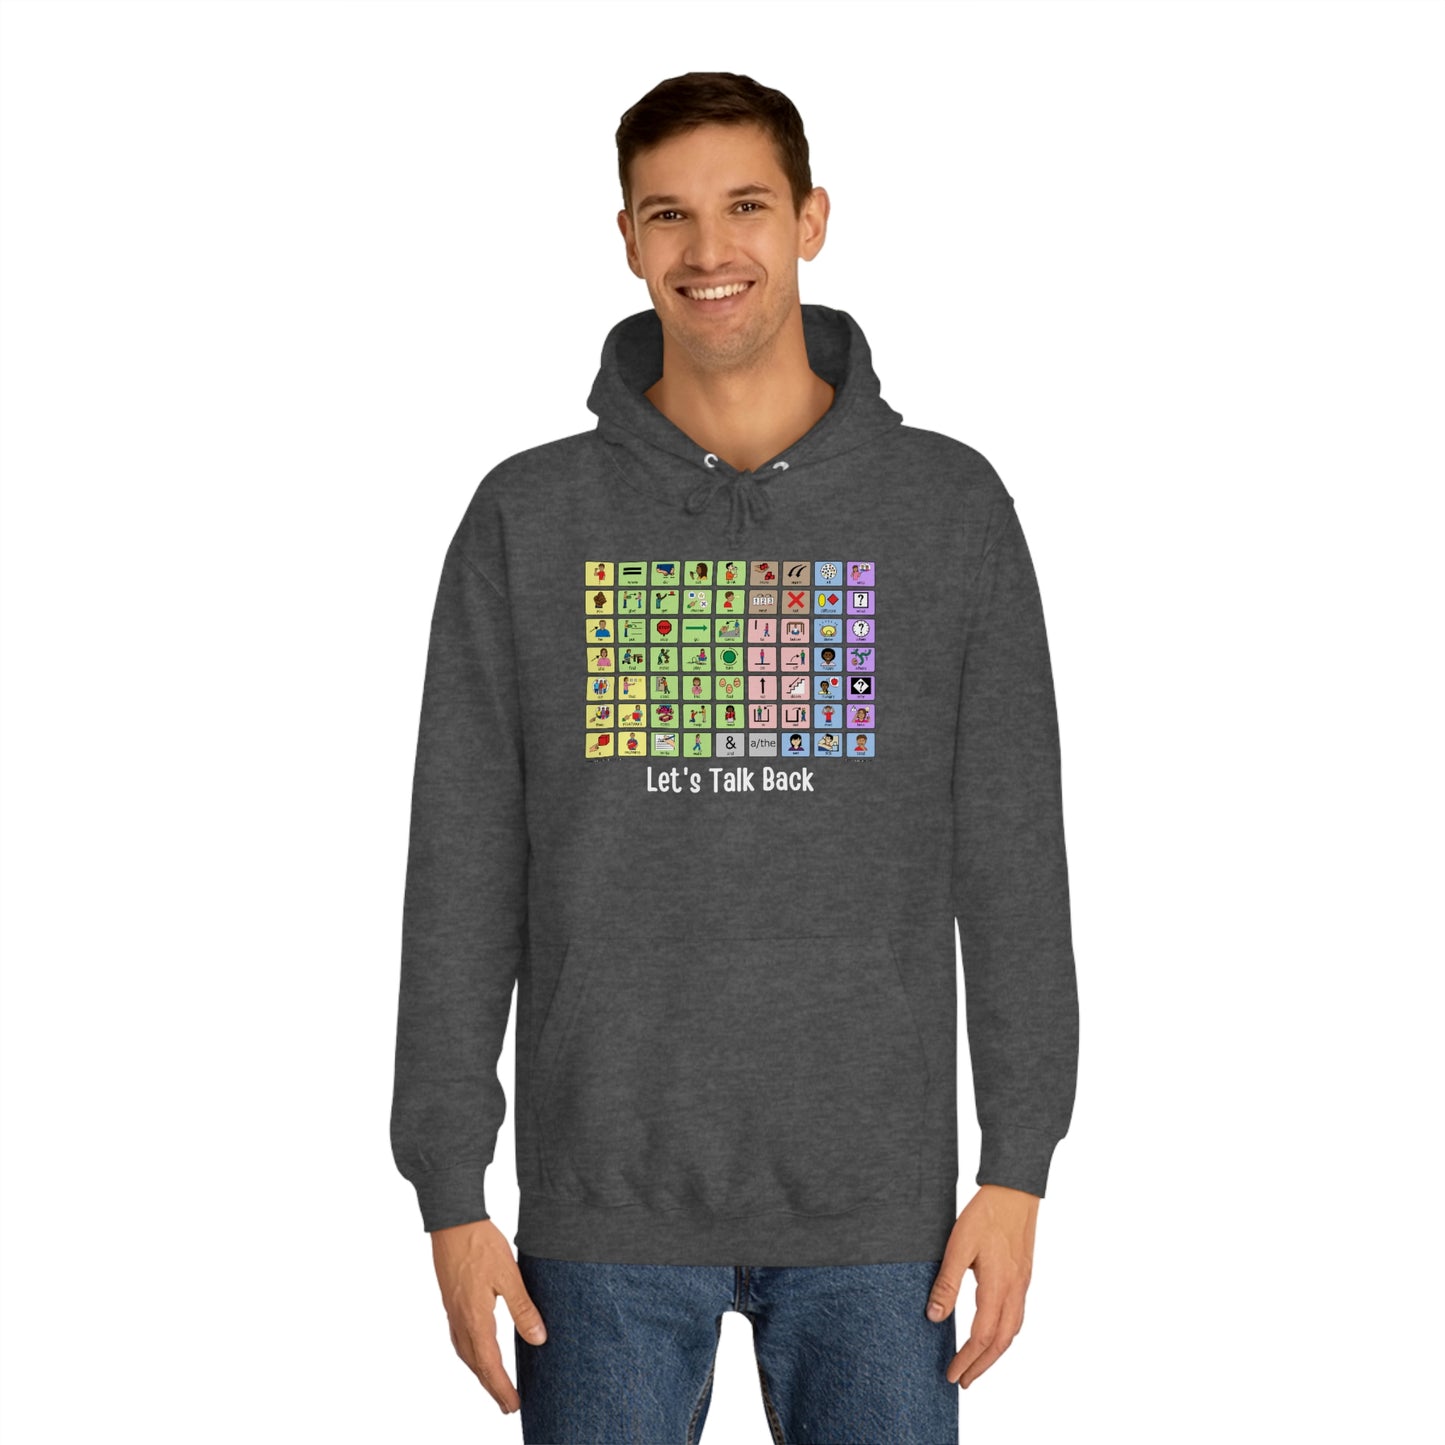 Talk Back with AAC a Unisex College Hoodie